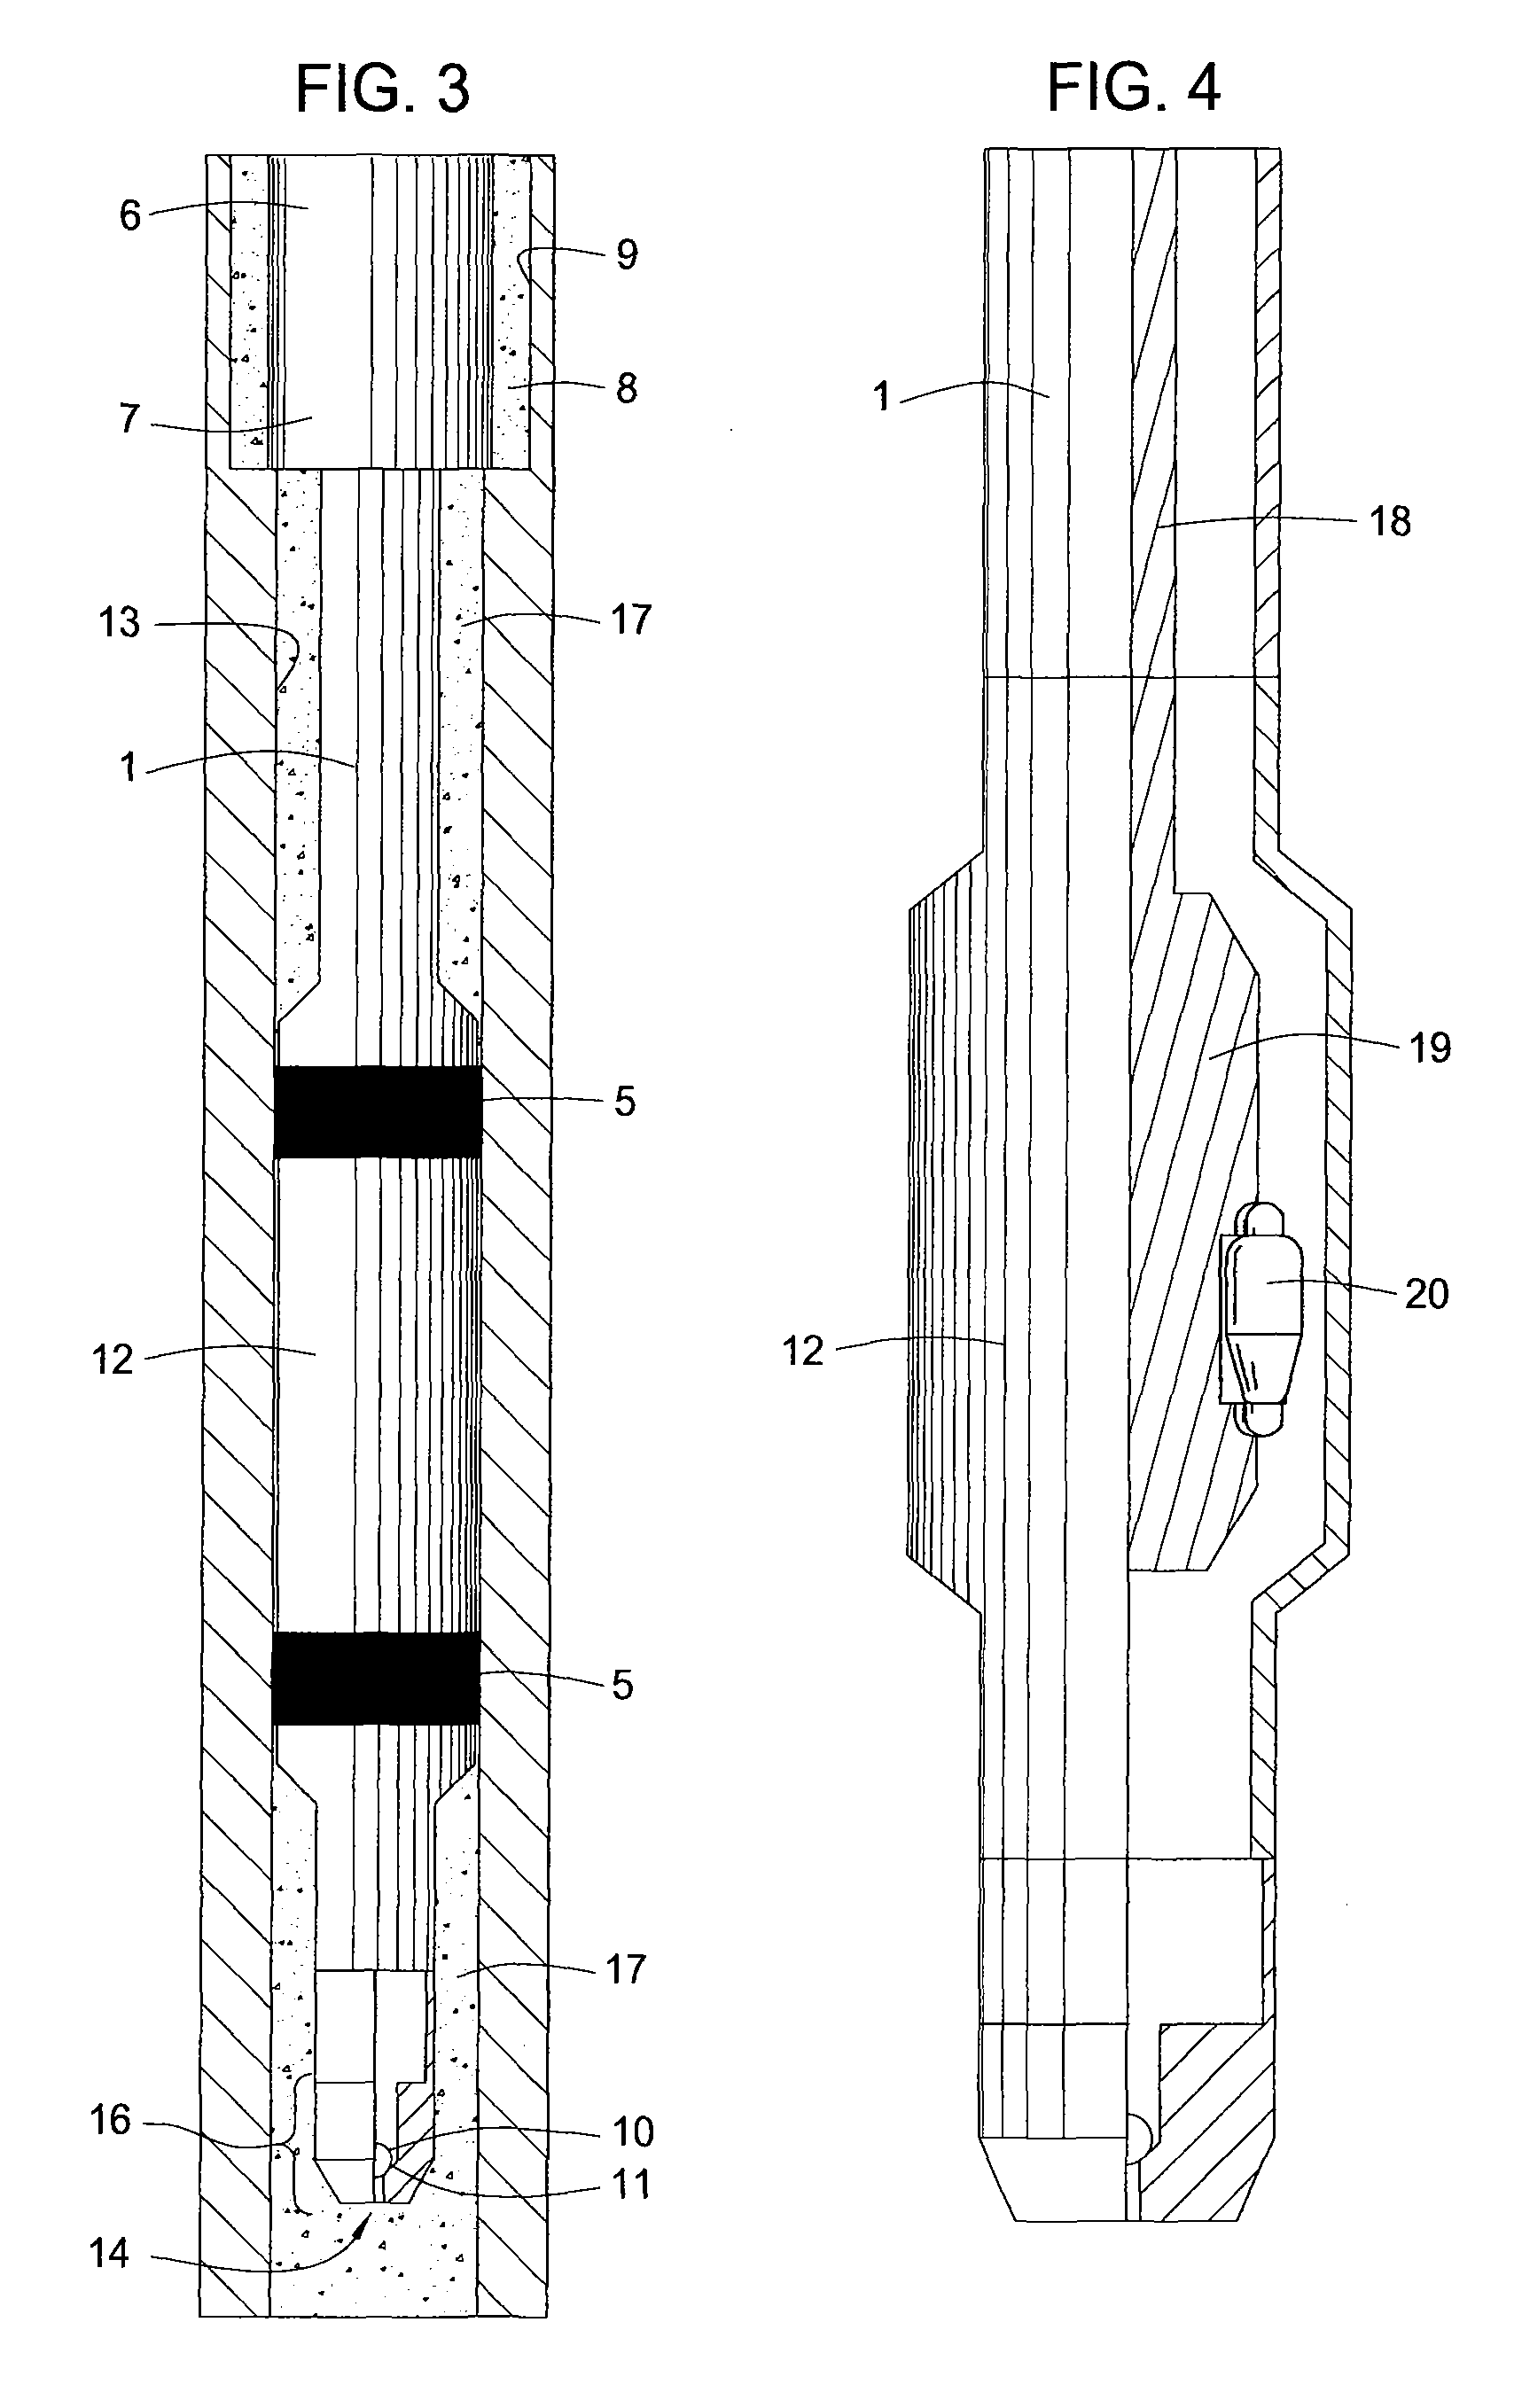 Apparatus and methods for creation of down hole annular barrier